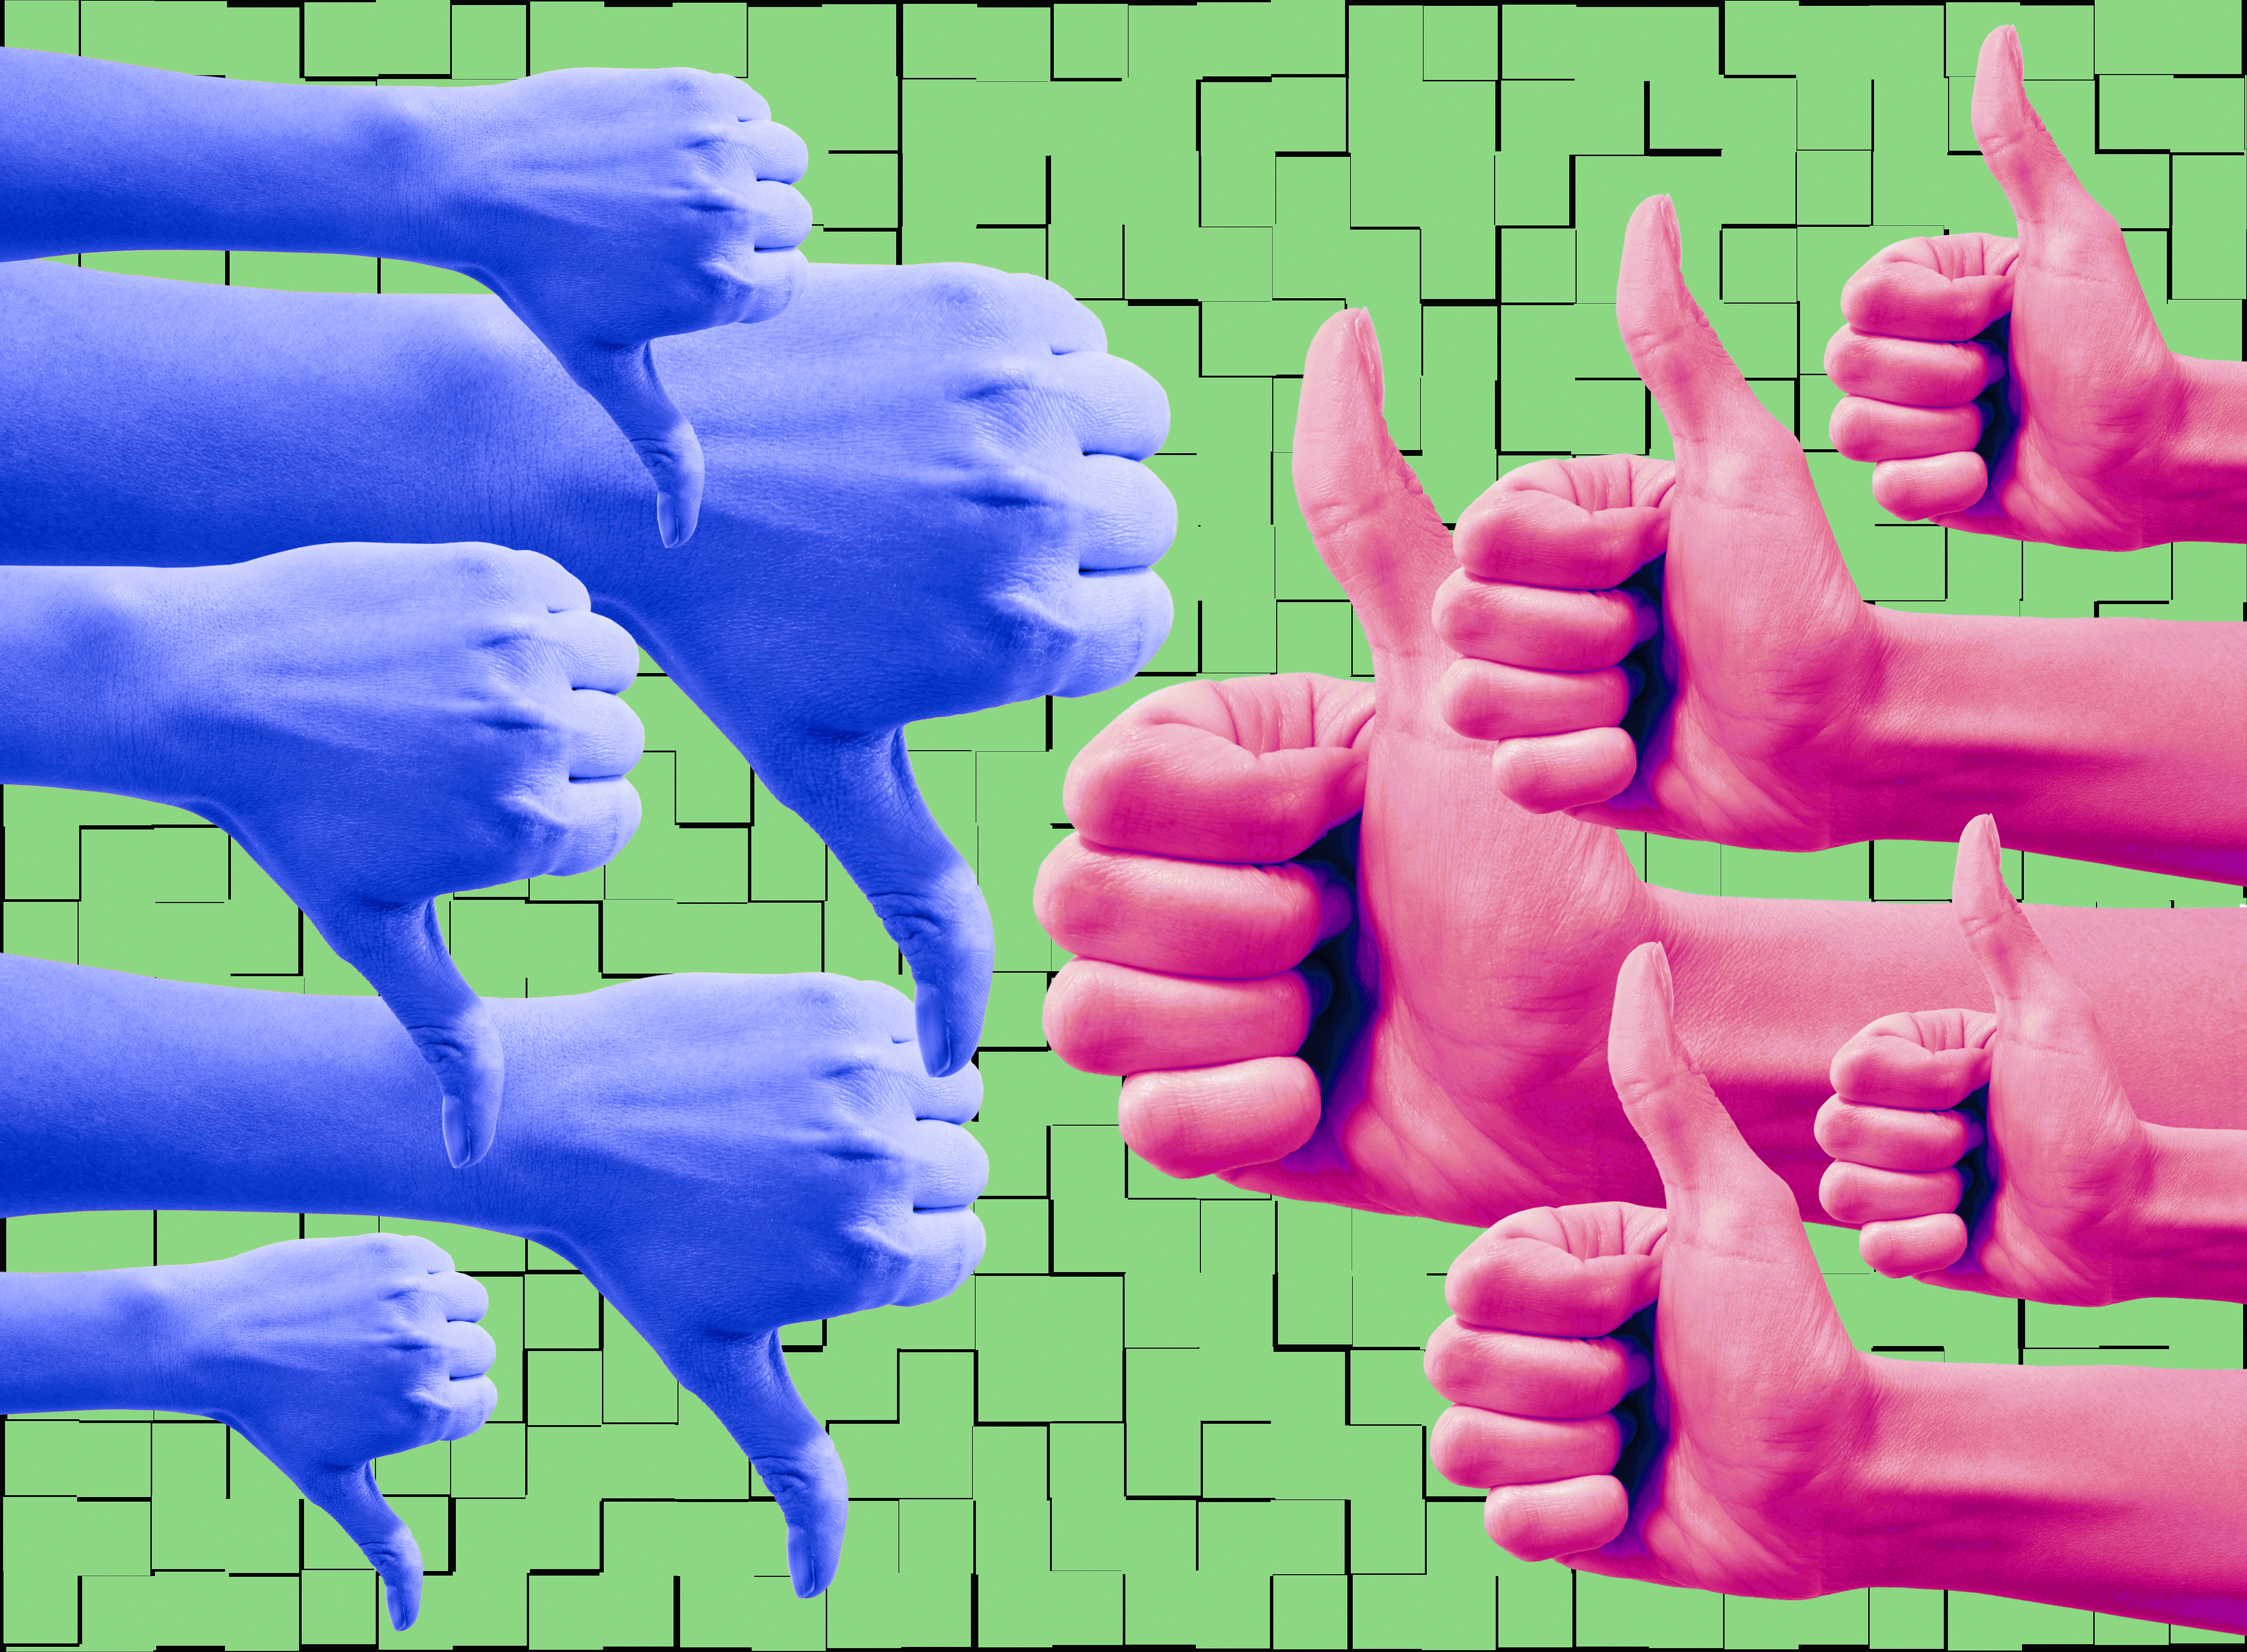 A collage-style illustration with a collection of photorealistic blue hands doing thumbs down on the left side of the image with a series of photorealistic red hands giving thumbs up on the right side of the image on an illustrated green background.